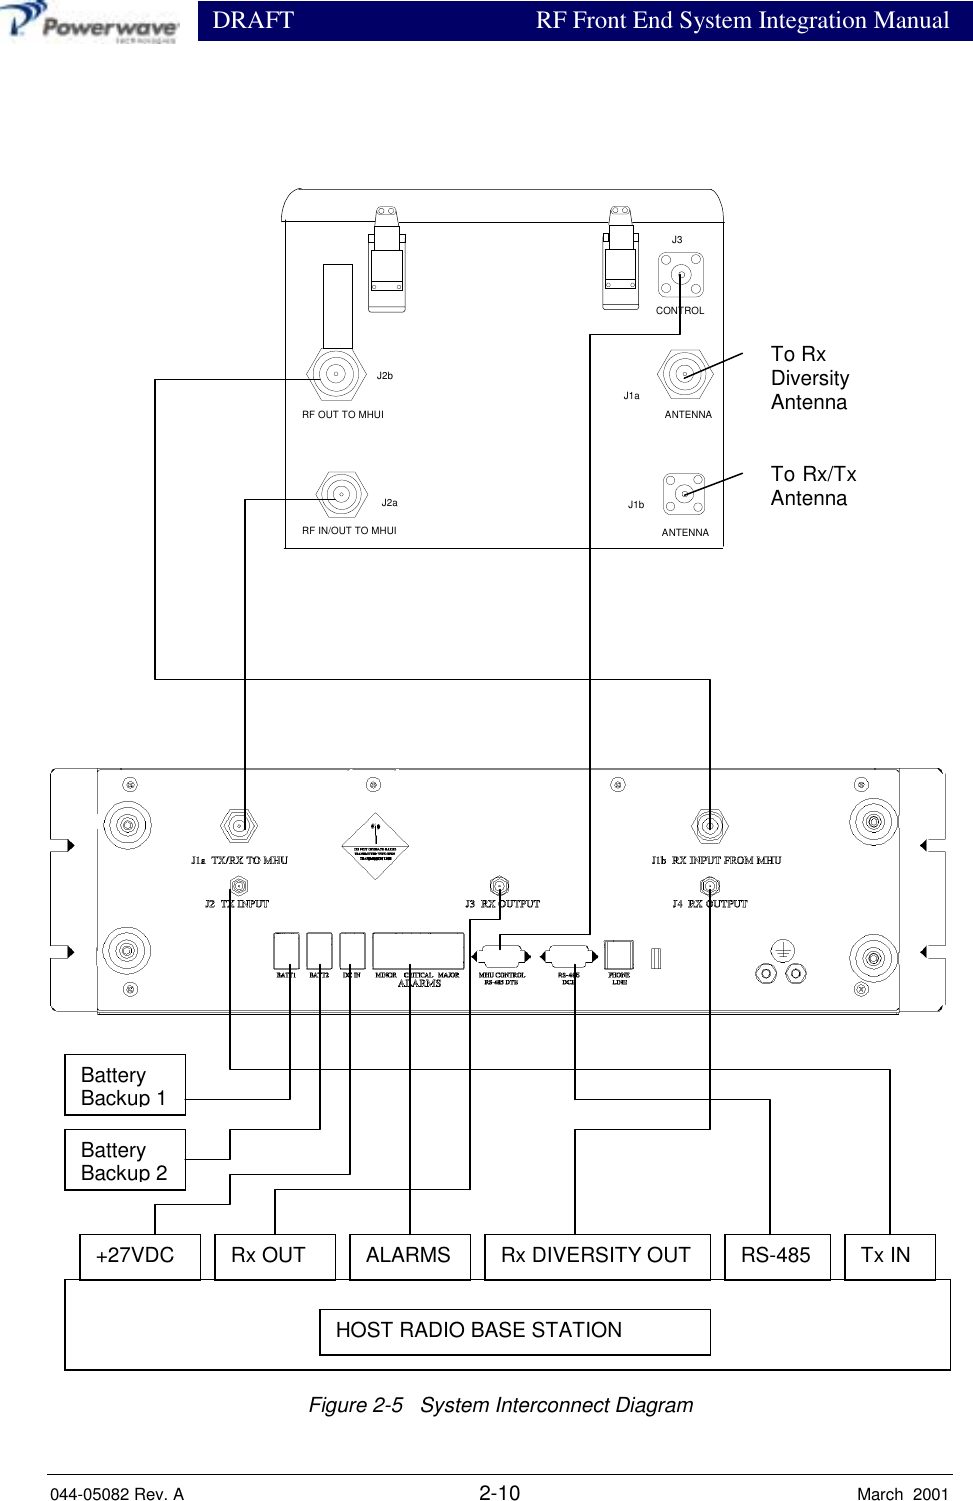                  DRAFT RF Front End System Integration Manual044-05082 Rev. A 2-10 March  2001Figure 2-5   System Interconnect DiagramRF OUT TO MHUIJ2bJ3CONTROLJ1aANTENNAJ1bANTENNARF IN/OUT TO MHUIJ2aHOST RADIO BASE STATIONRx OUT Rx DIVERSITY OUT Tx INTo Rx/TxAntennaTo RxDiversityAntennaALARMS RS-485BatteryBackup 1BatteryBackup 2+27VDC